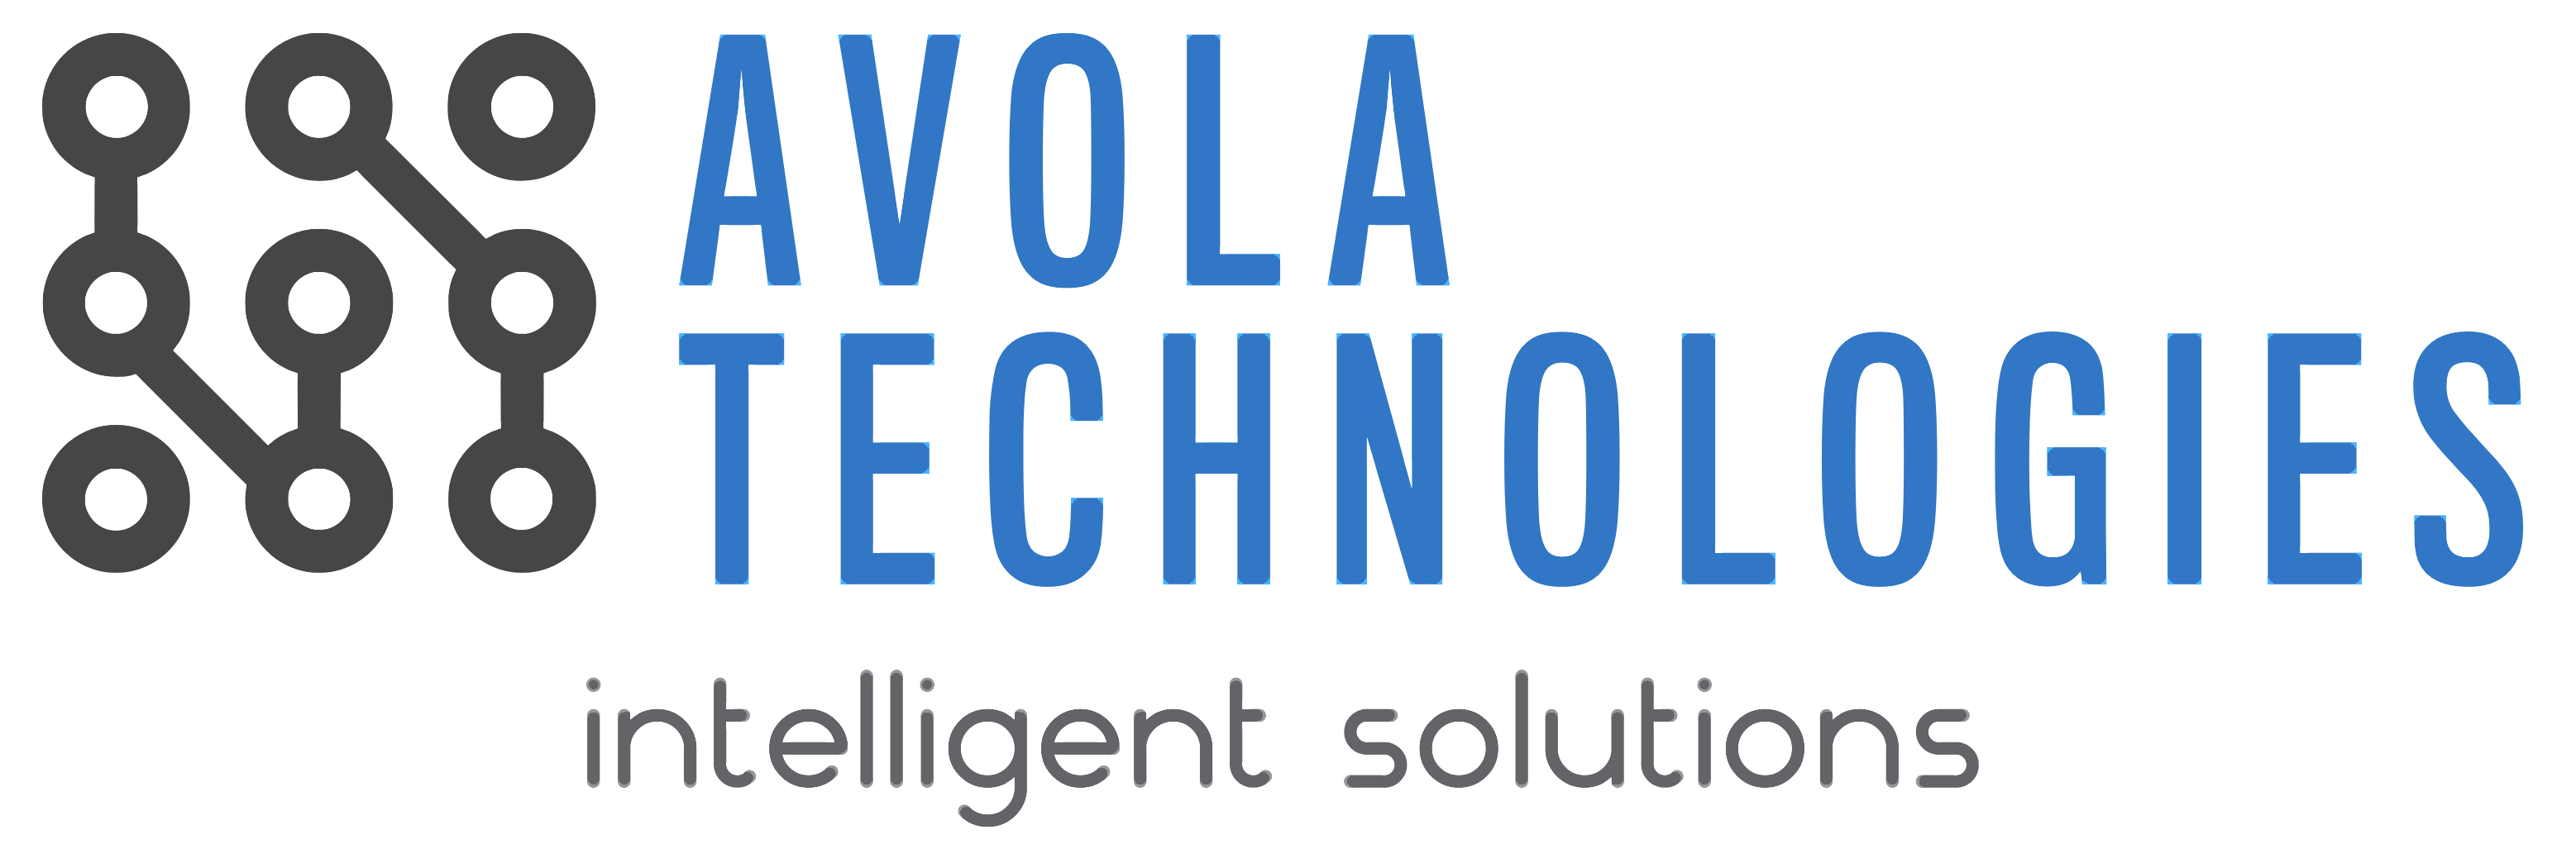 Technology Solutions & Services | Avola Technologies